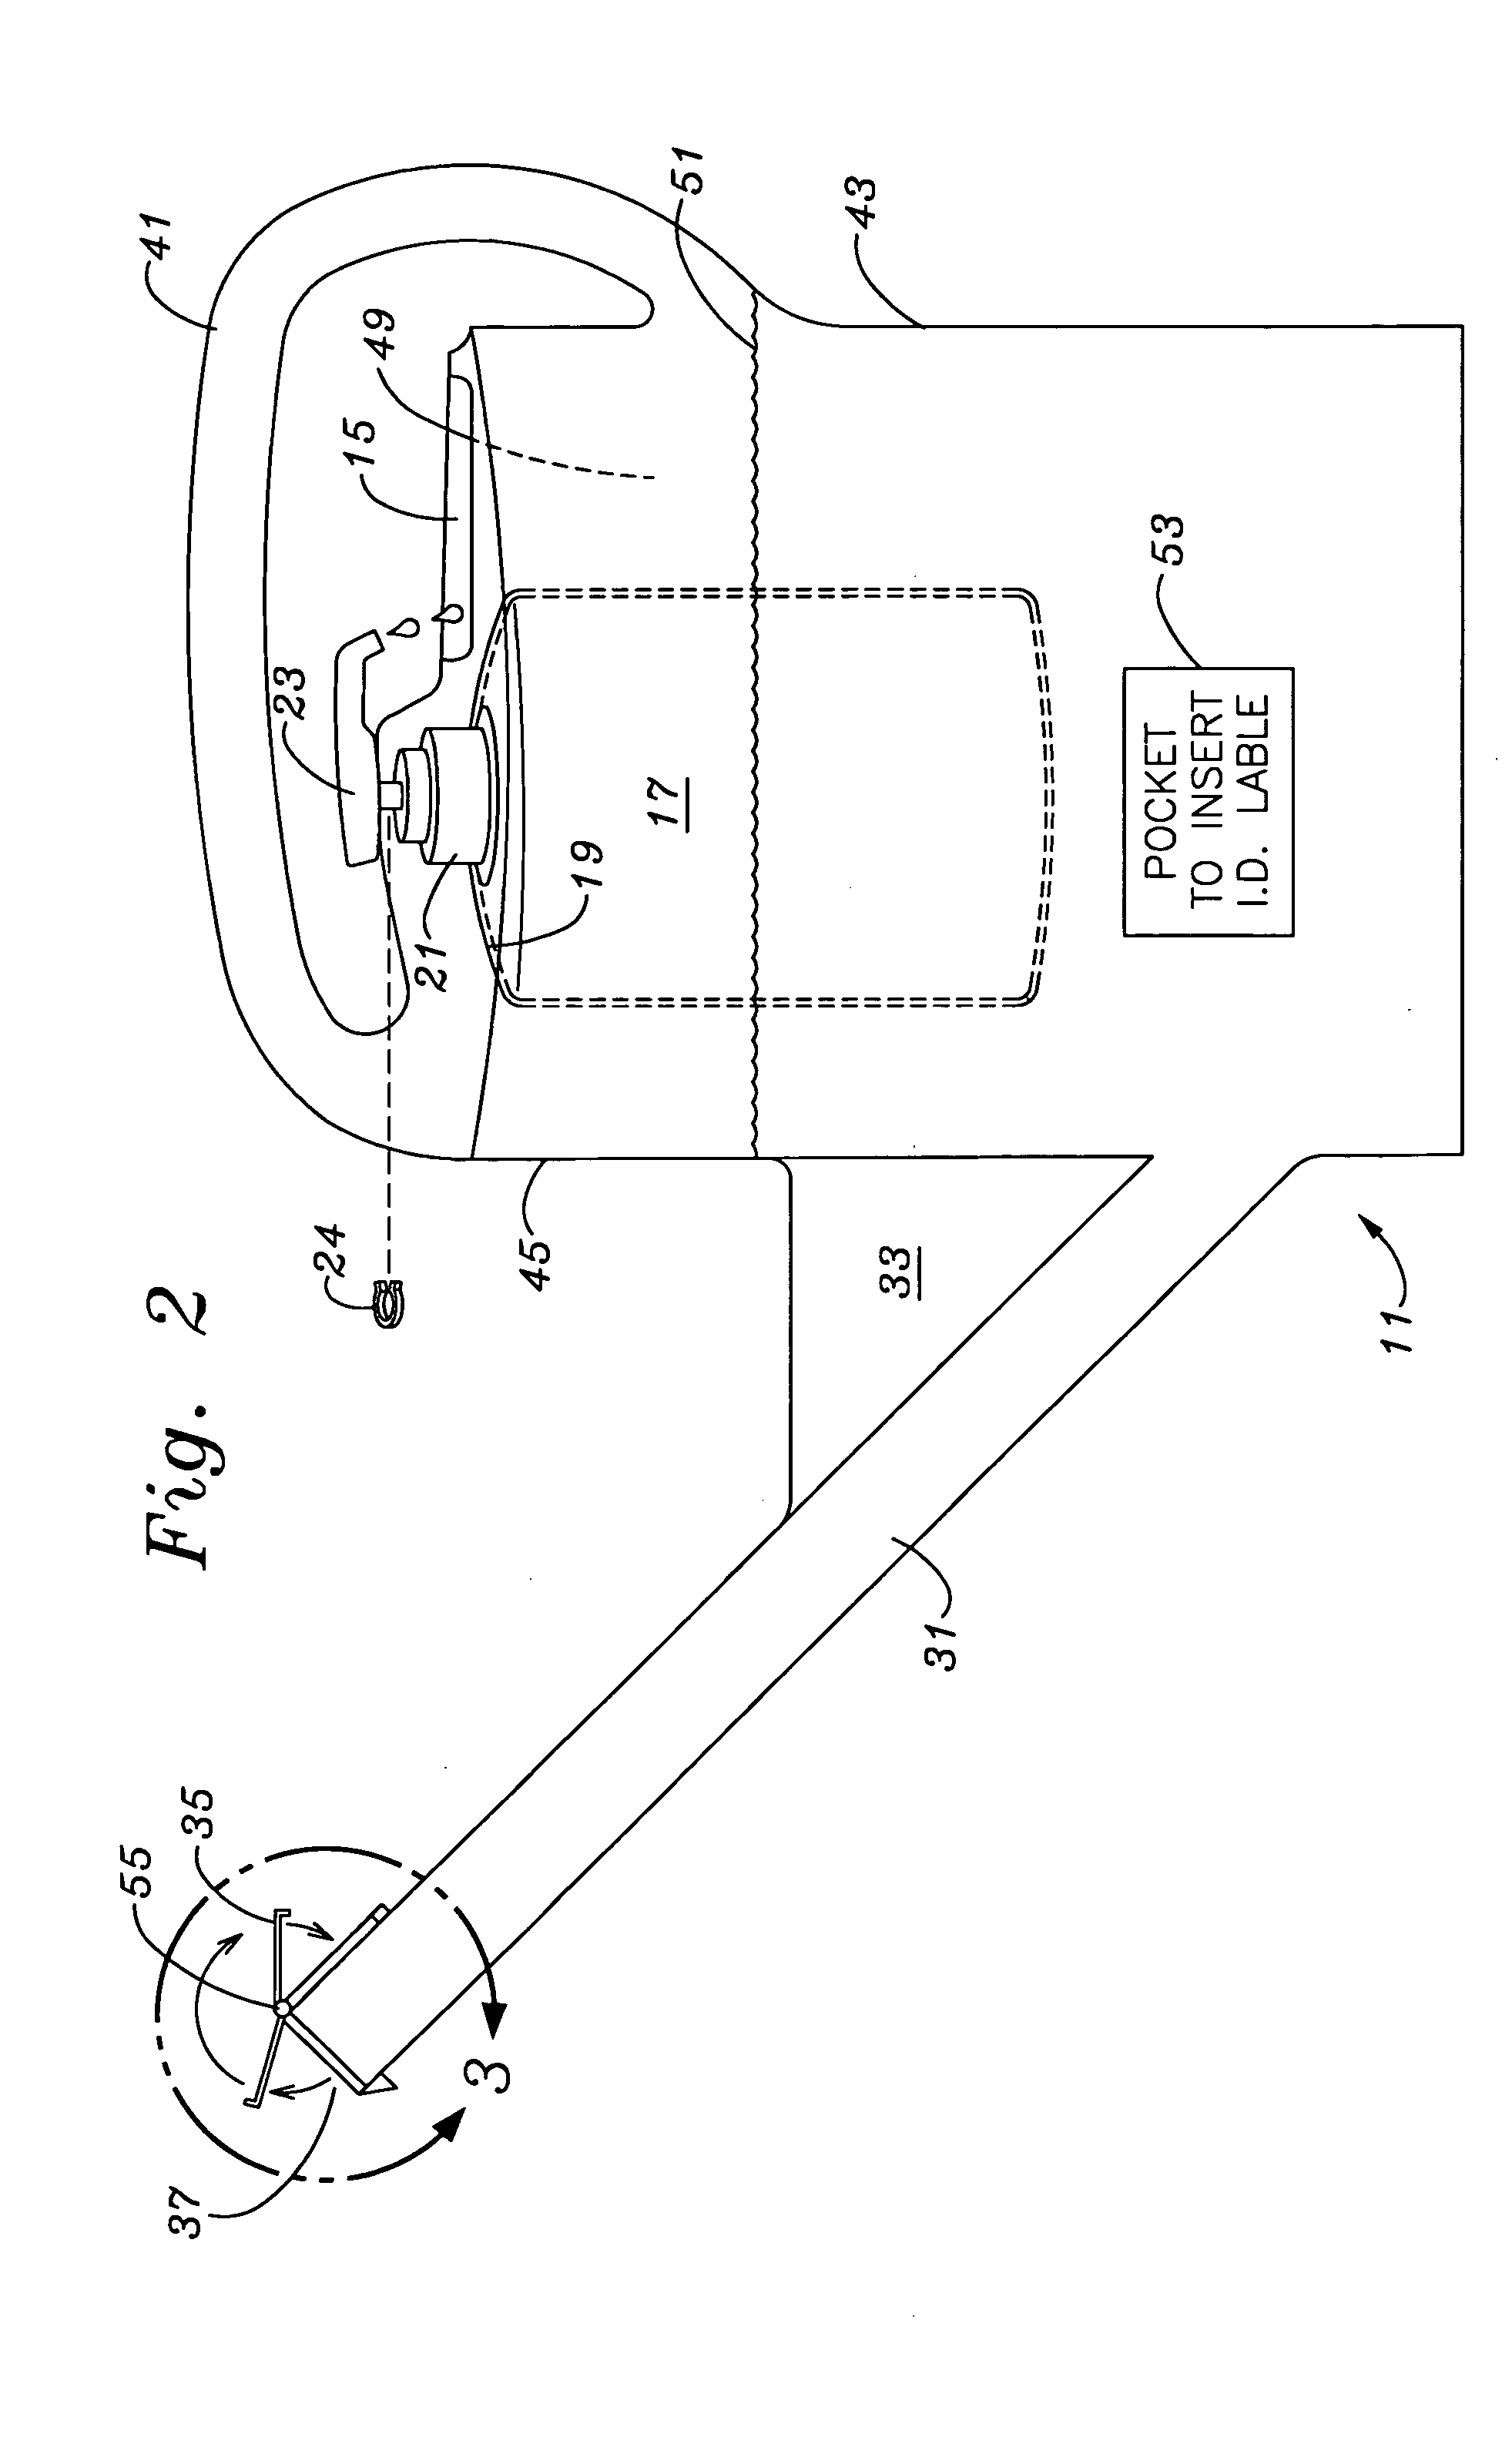 Applicator and integrated concentrate system